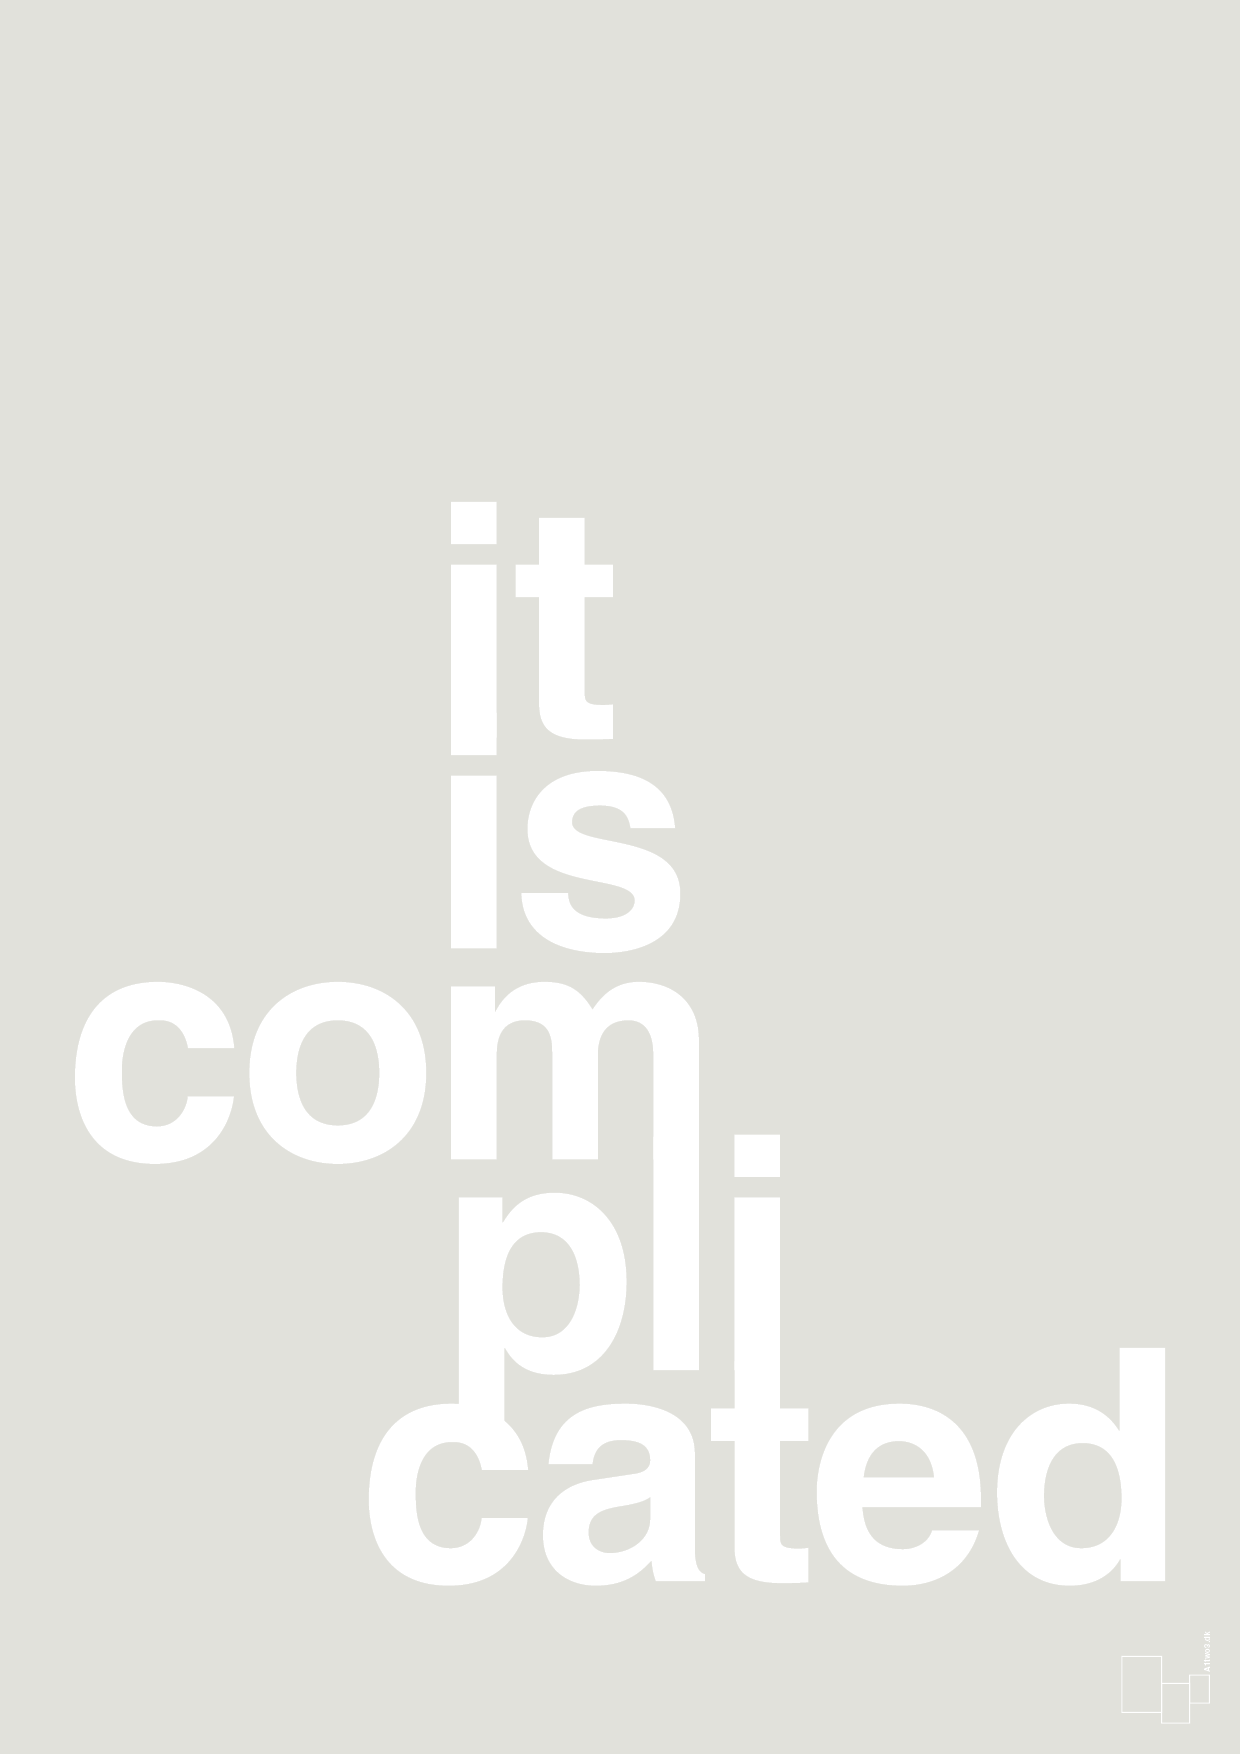 it is complicated - Plakat med Ordsprog i Painters White